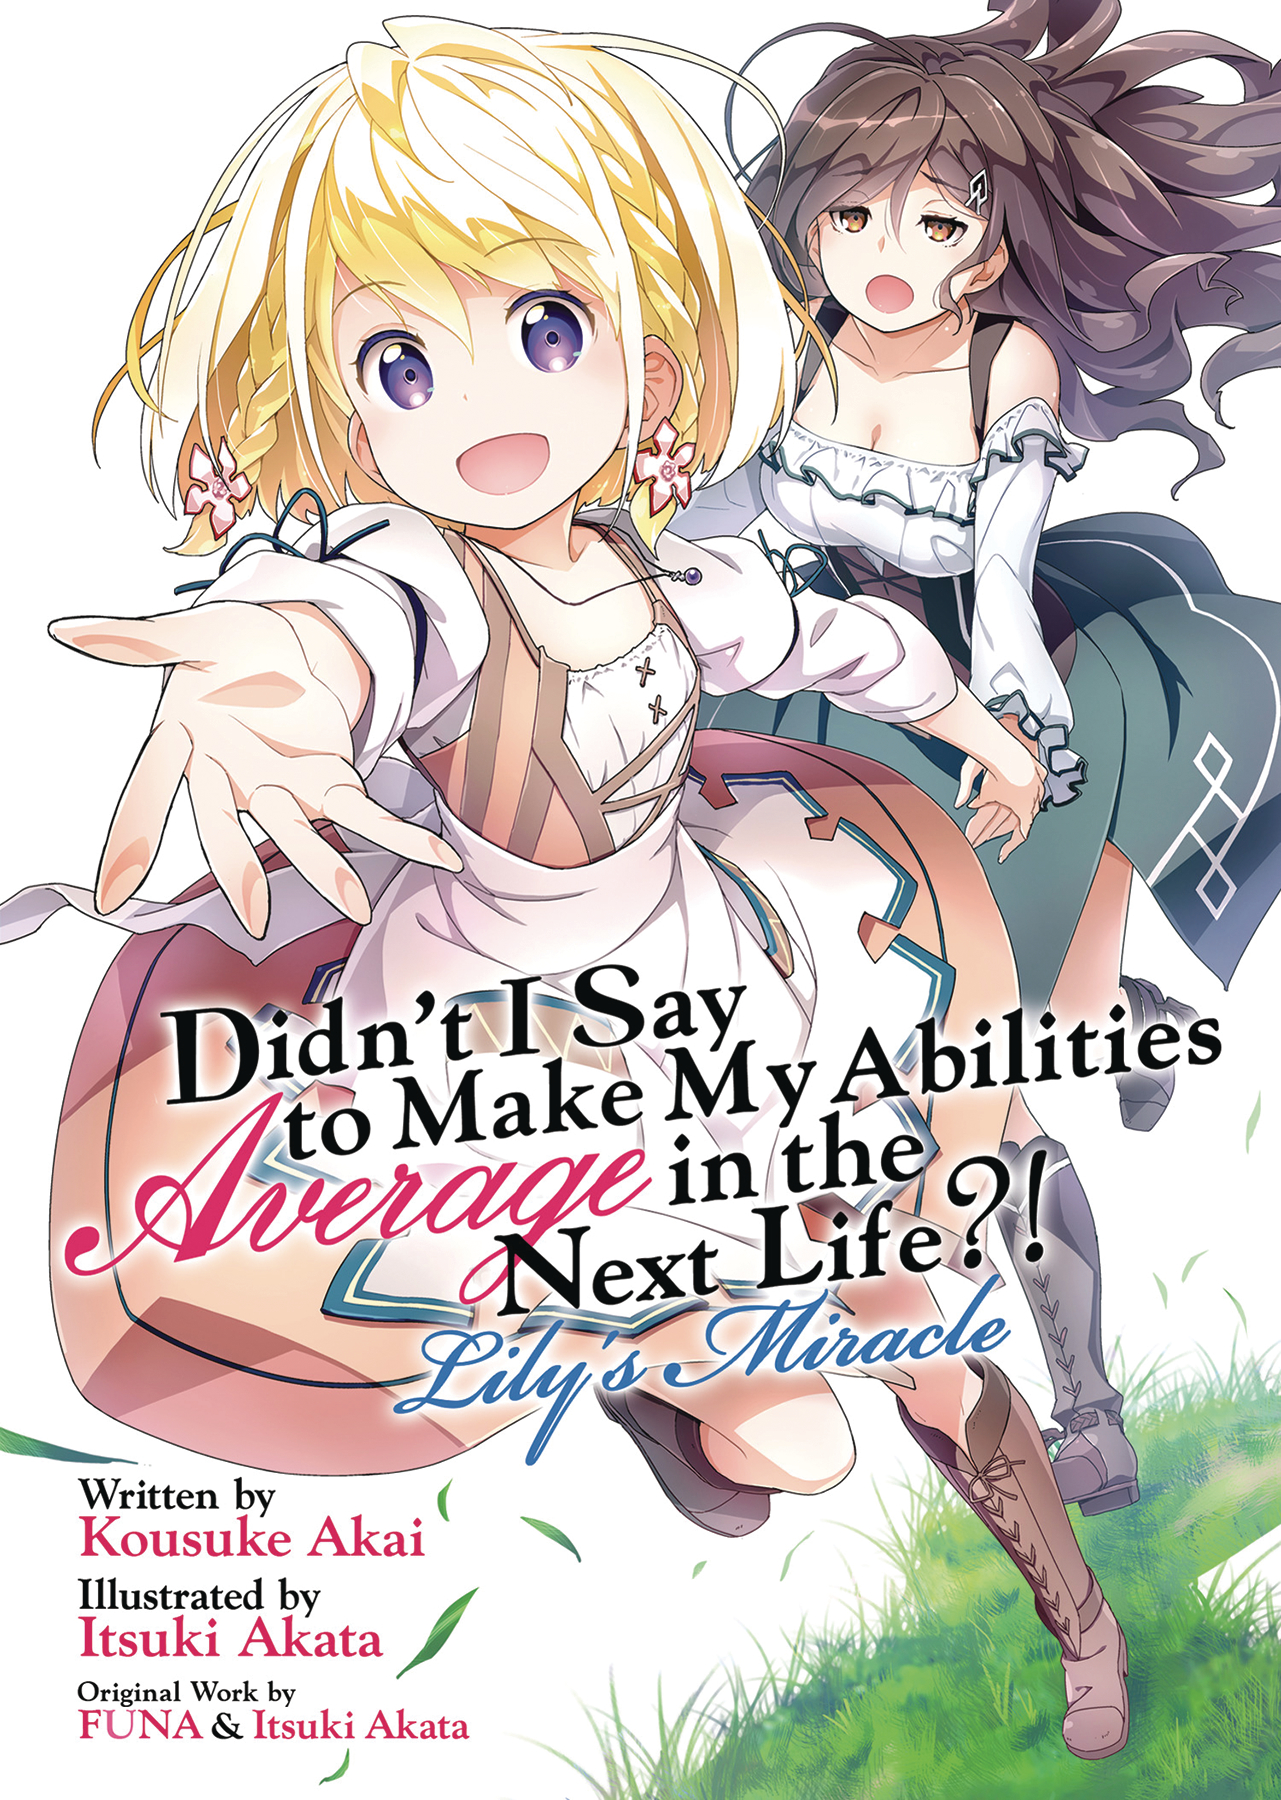 Didn't I Say to Make My Abilities Average in the Next Life?! Light Novel Volume 14